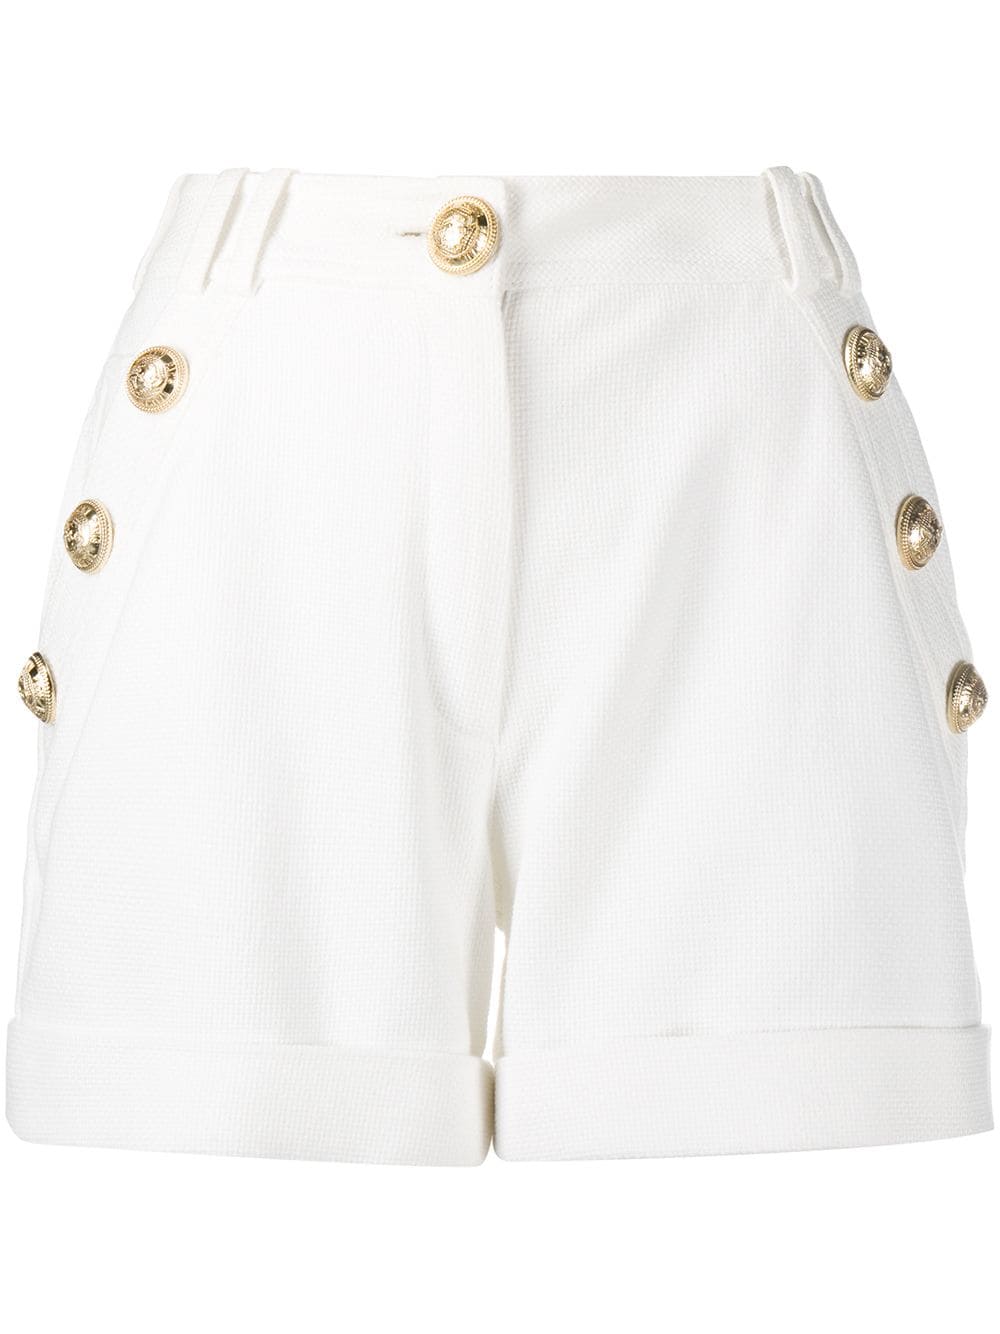 Kate Middleton's White Shorts Are Perfect for Summer : Shop Her Look,  Similar Styles